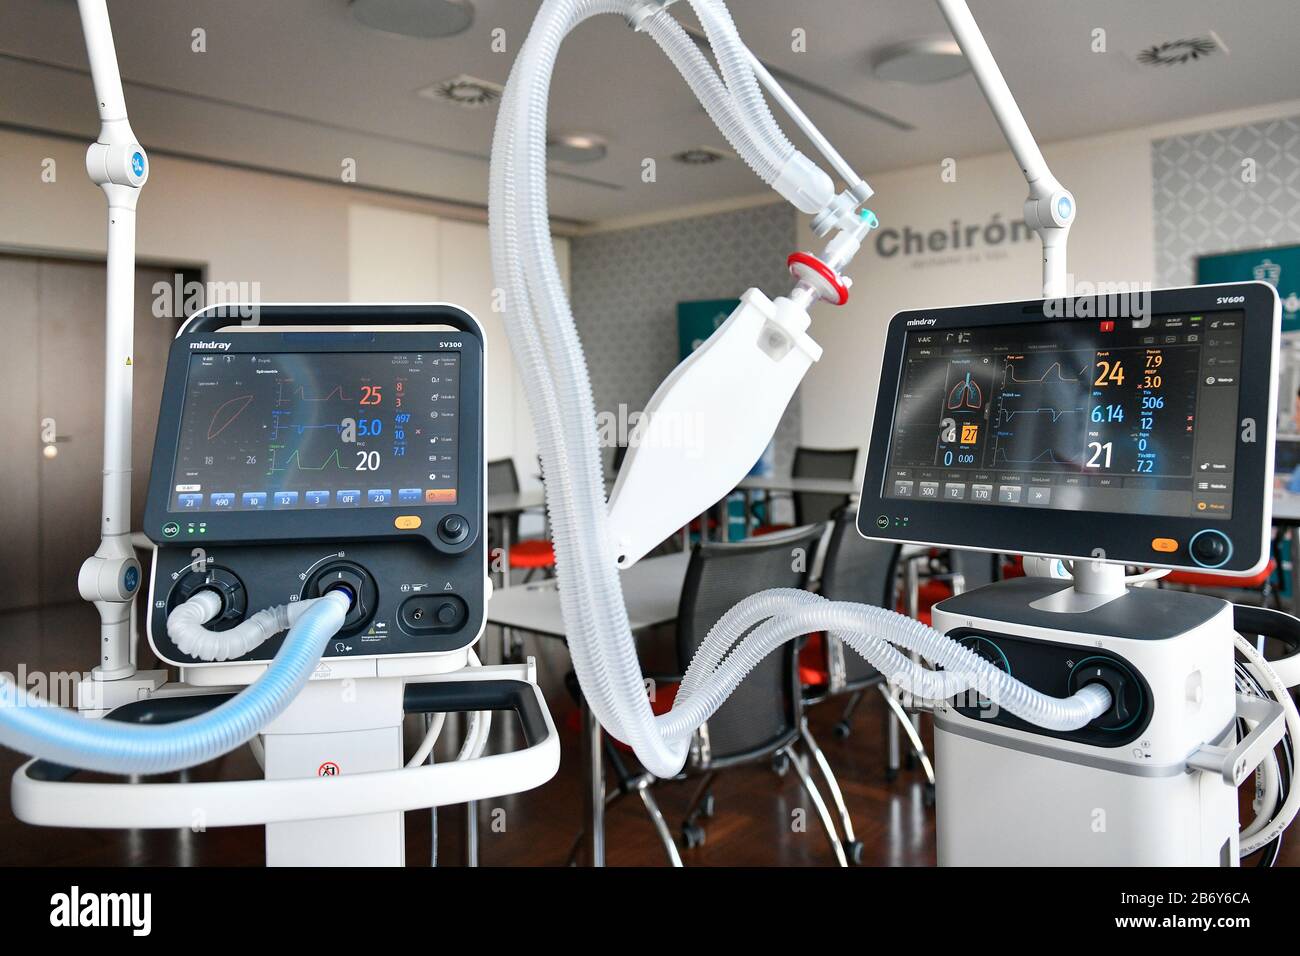 Pilsen, Czech Republic. 12th Mar, 2020. CHEIRON company presents a high-end  lung ventilator mindray SV 800 and SV 600 featured wide screen combines  powerful tools and modules in Pilsen, Czech Republic, March